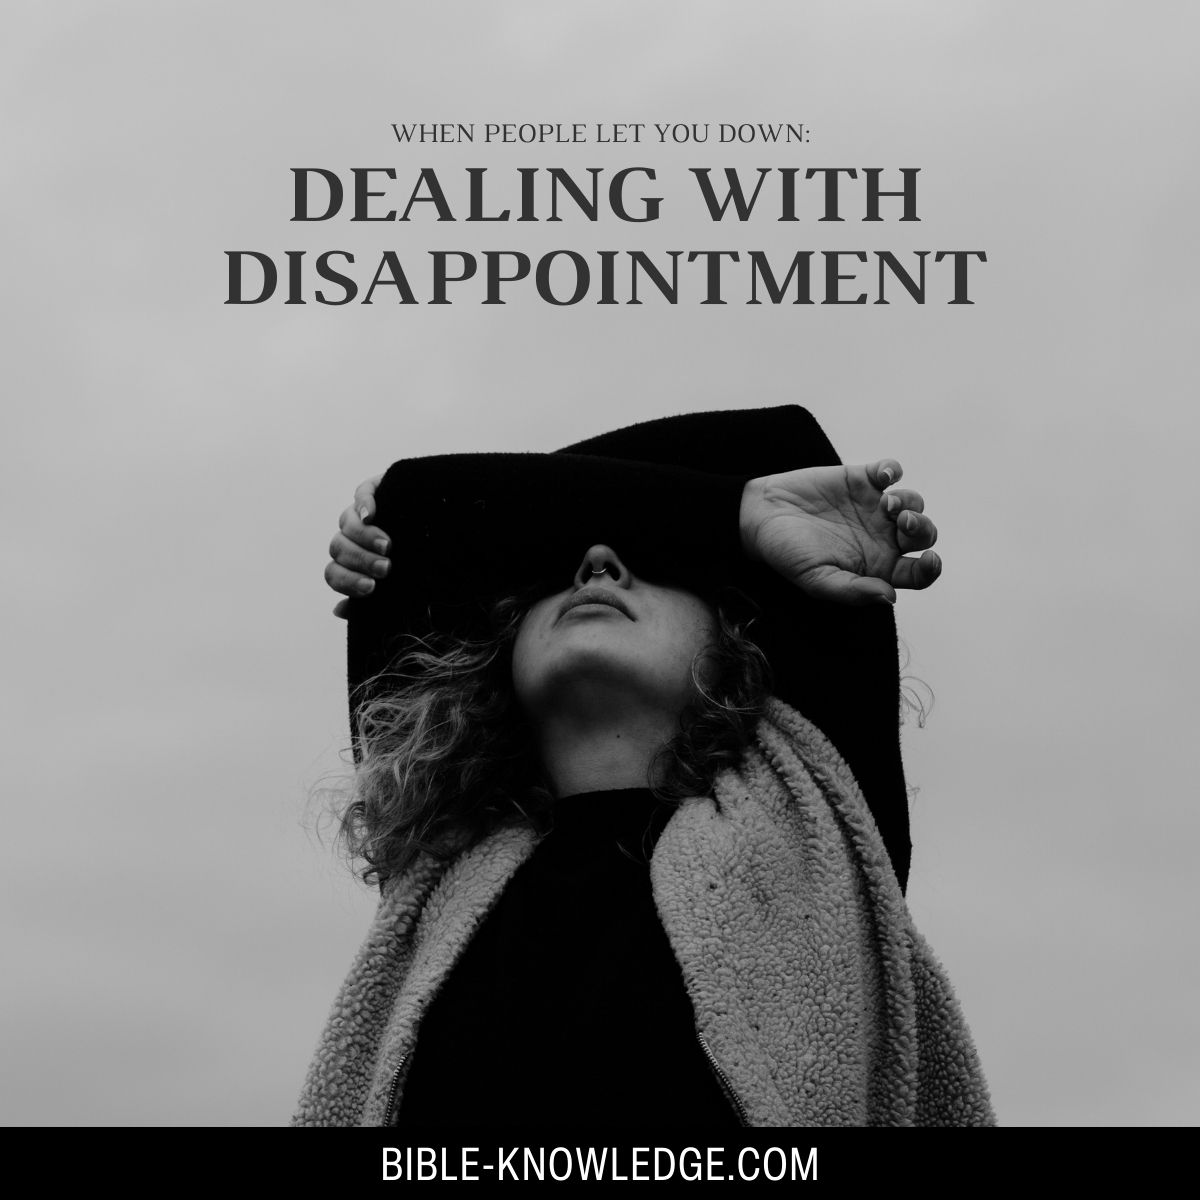 When People Let You Down: Dealing with Disappointment